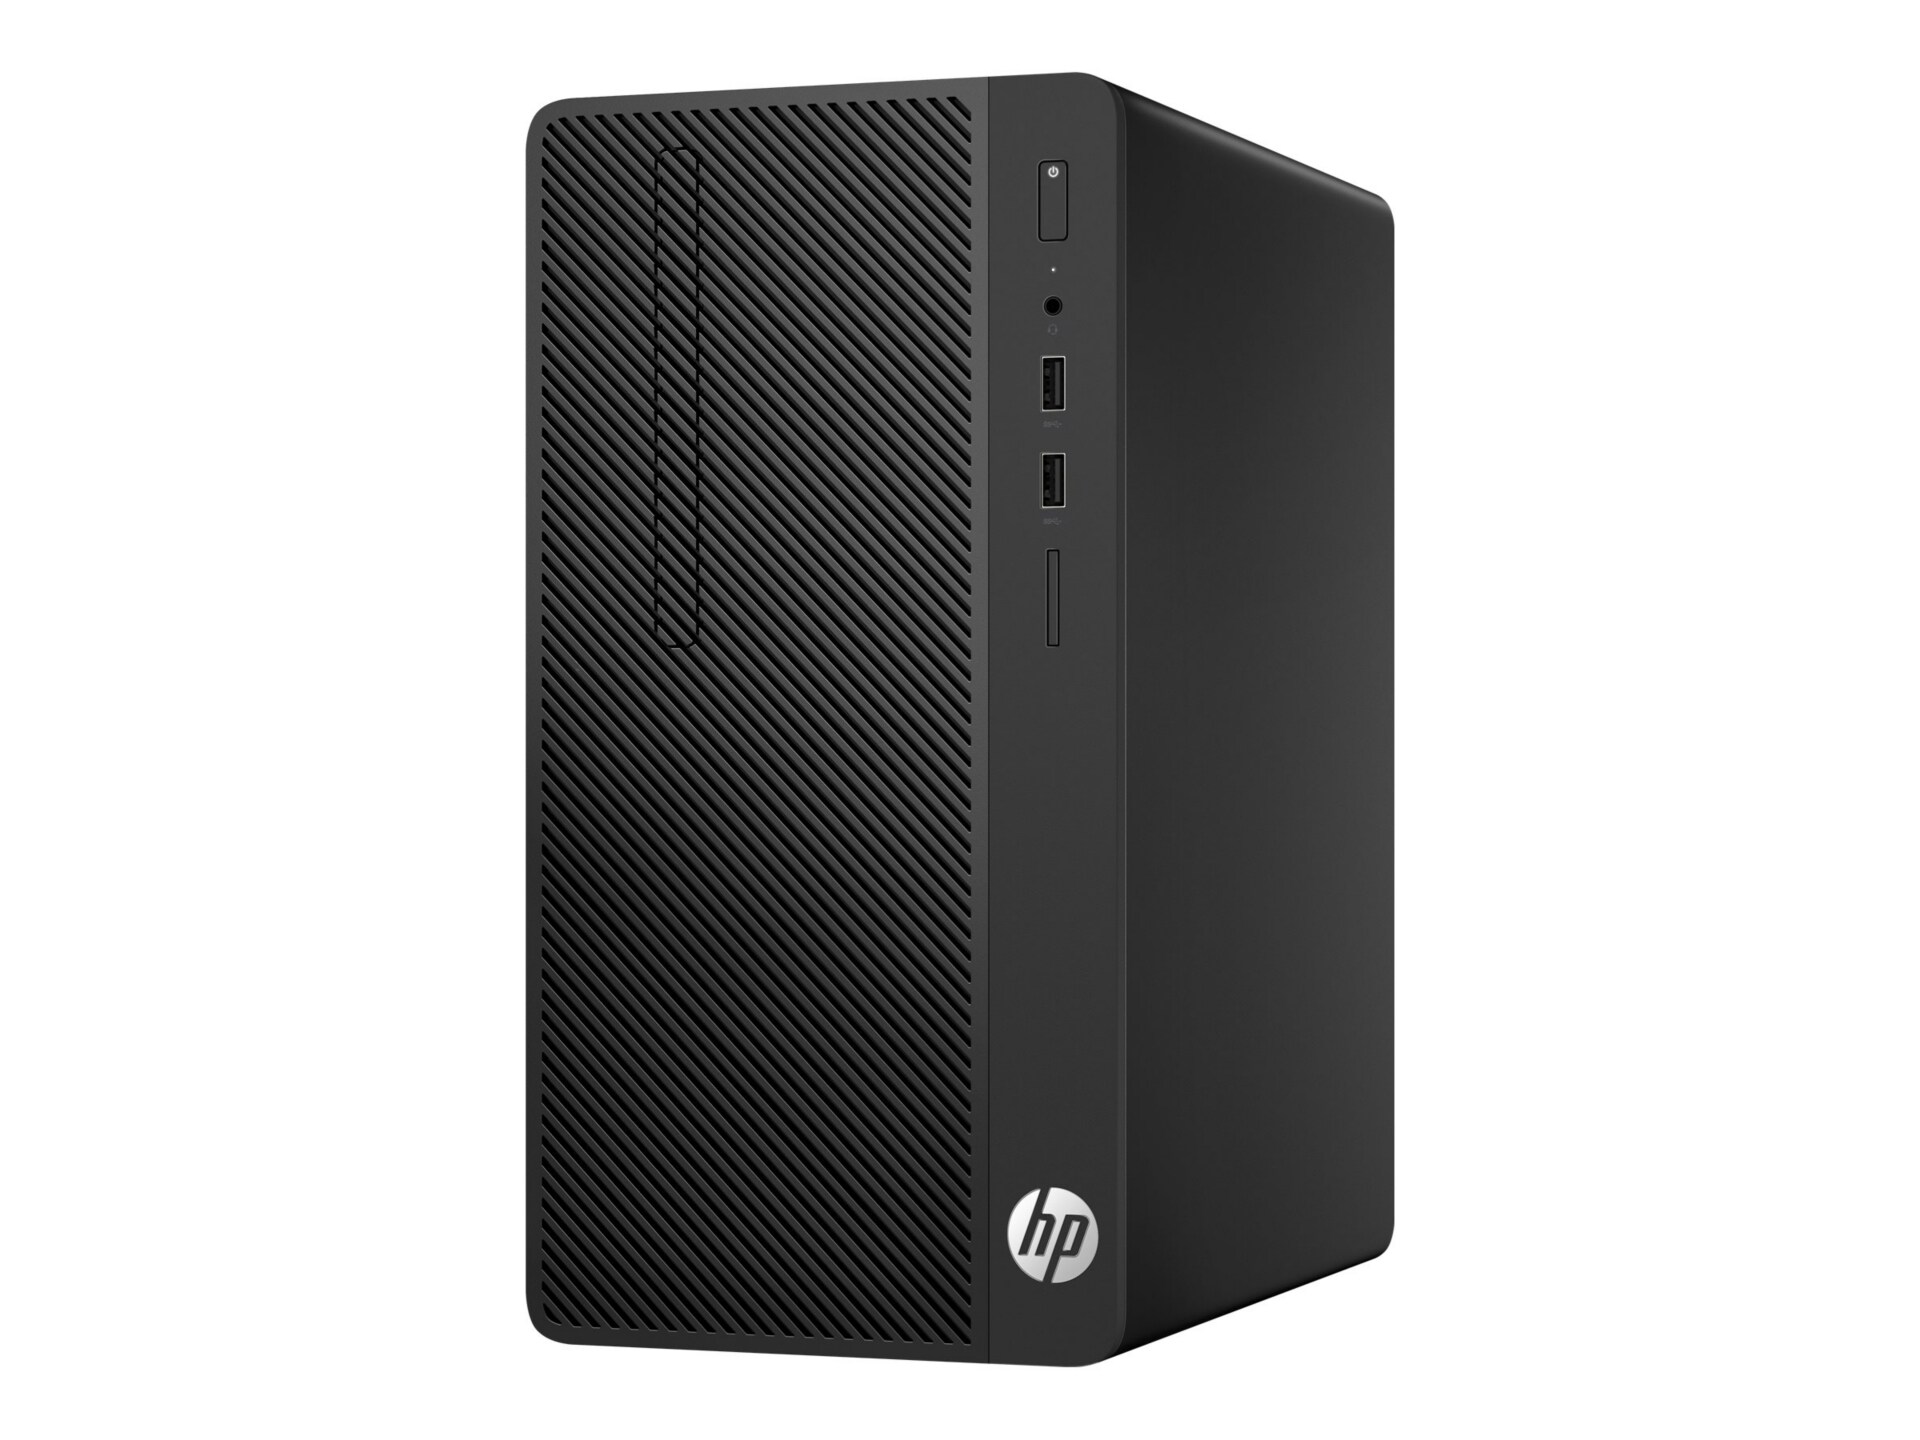 HP 280 G3 - micro tower - Core i5 6500 3.2 GHz - 4 GB - 500 GB